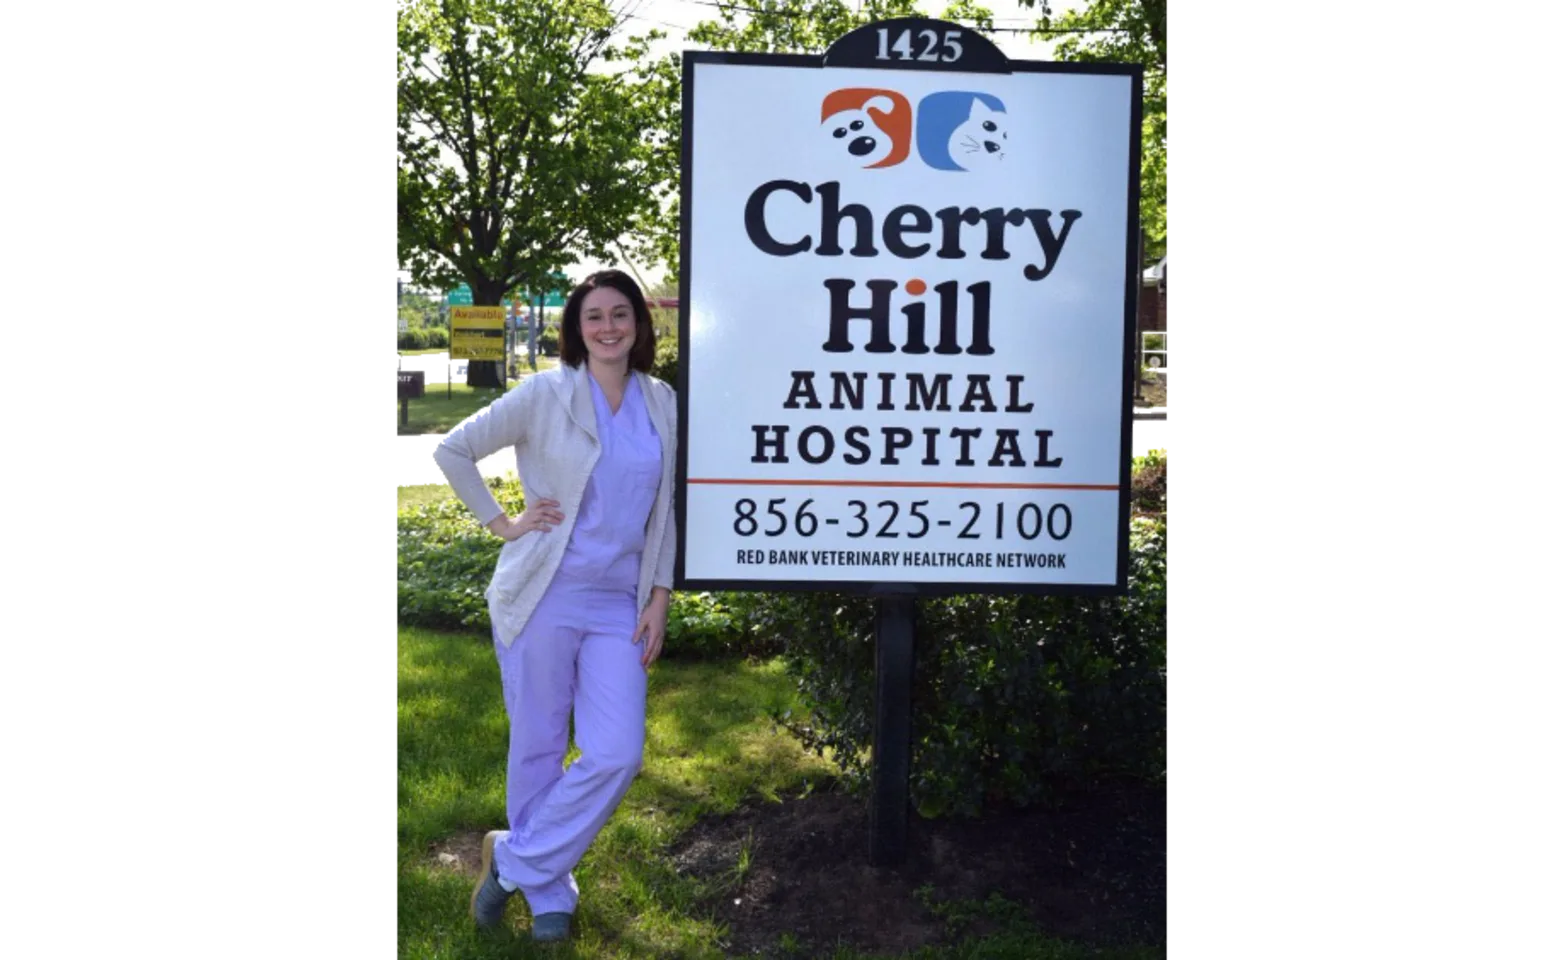 Staff standing next to Cherry Hill Animal Hospital sign